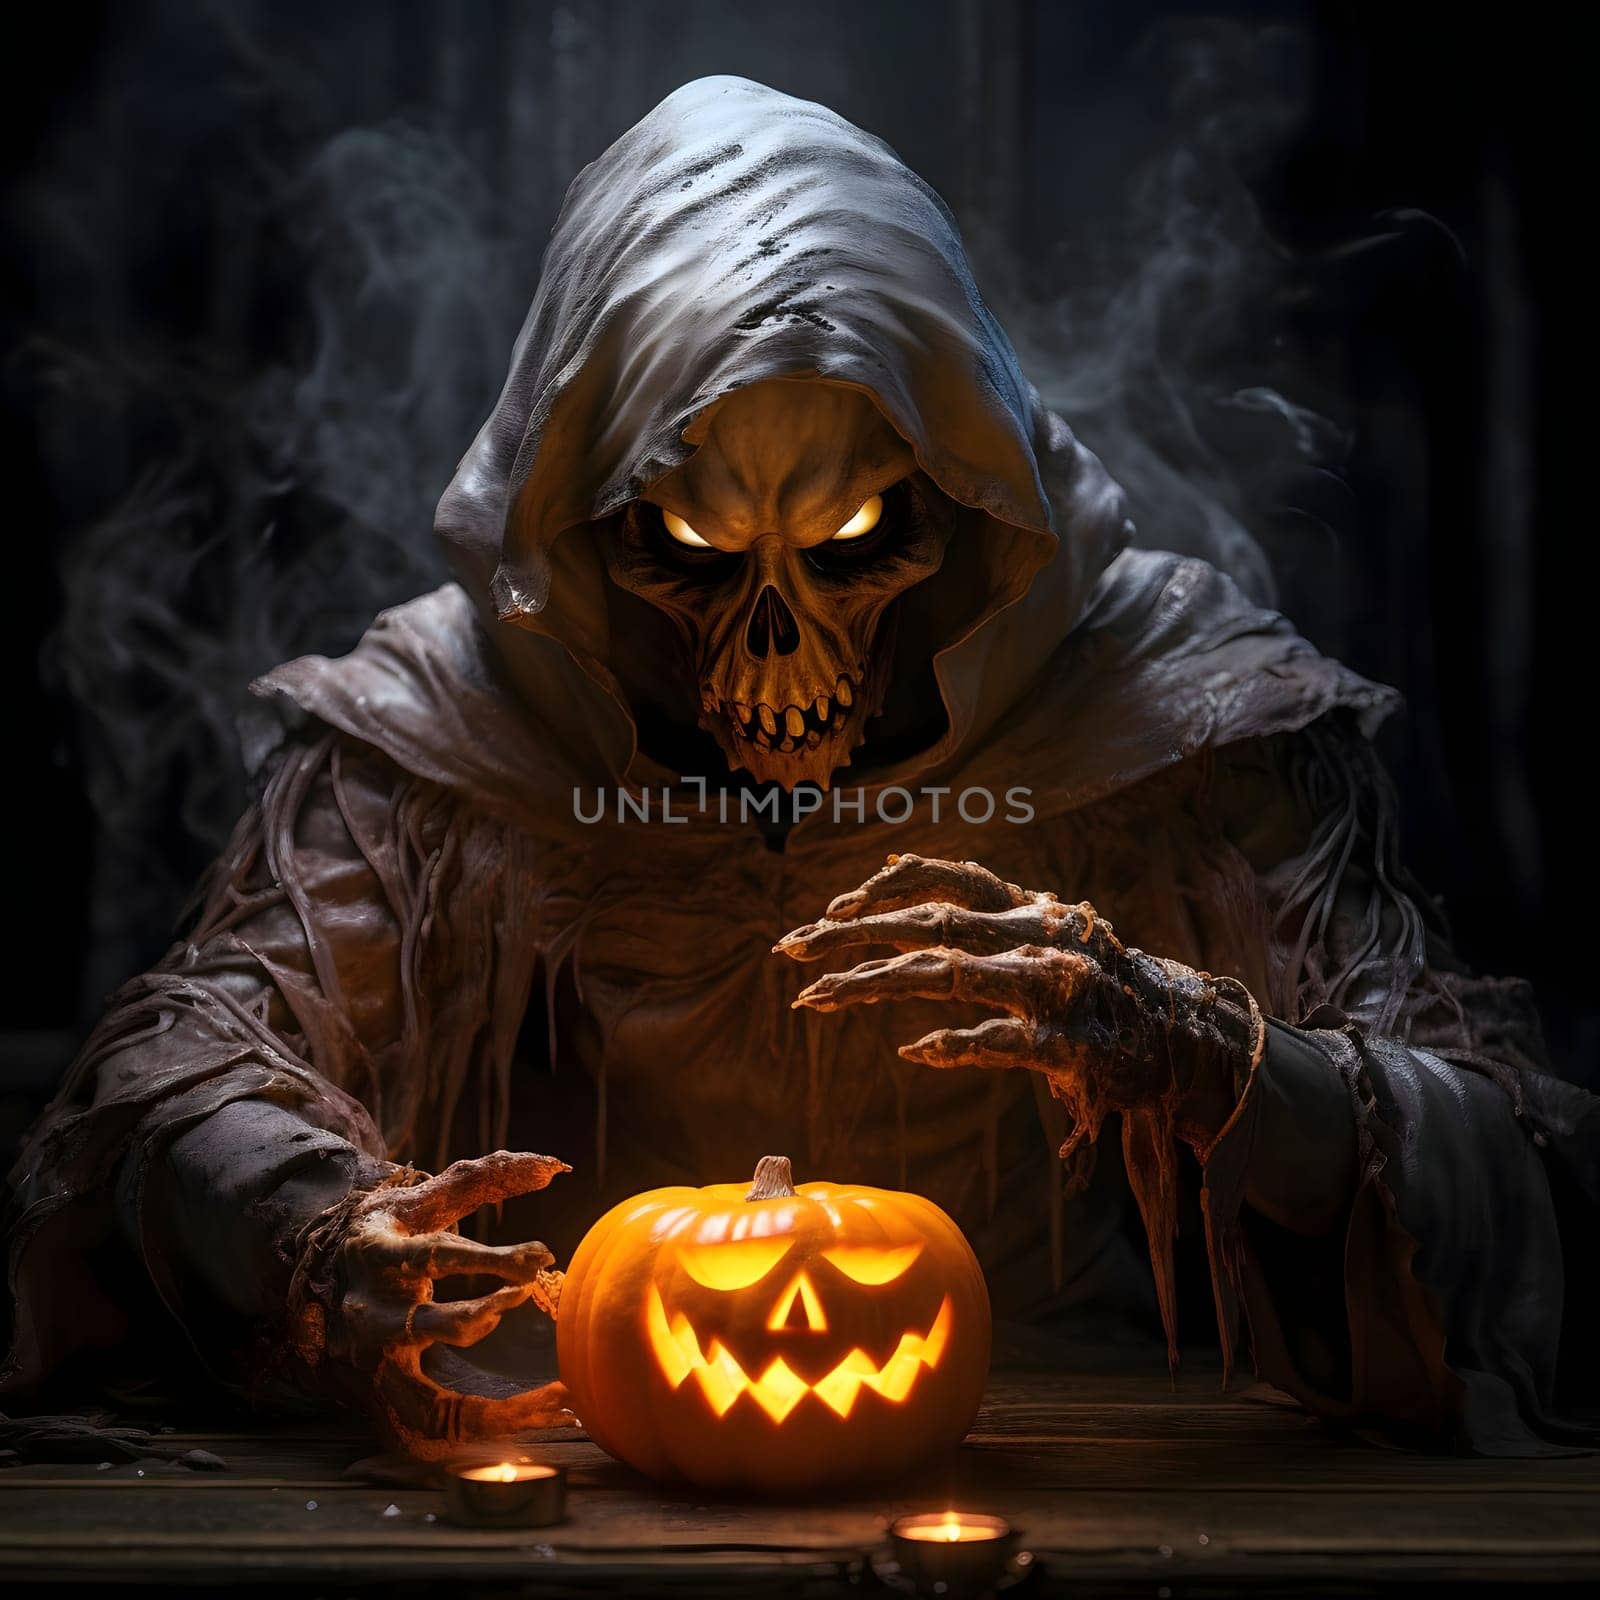 A dark skeleton in a fortune teller's cloak holding hands over a jack-o-lantern pumpkin, a Halloween image. by ThemesS